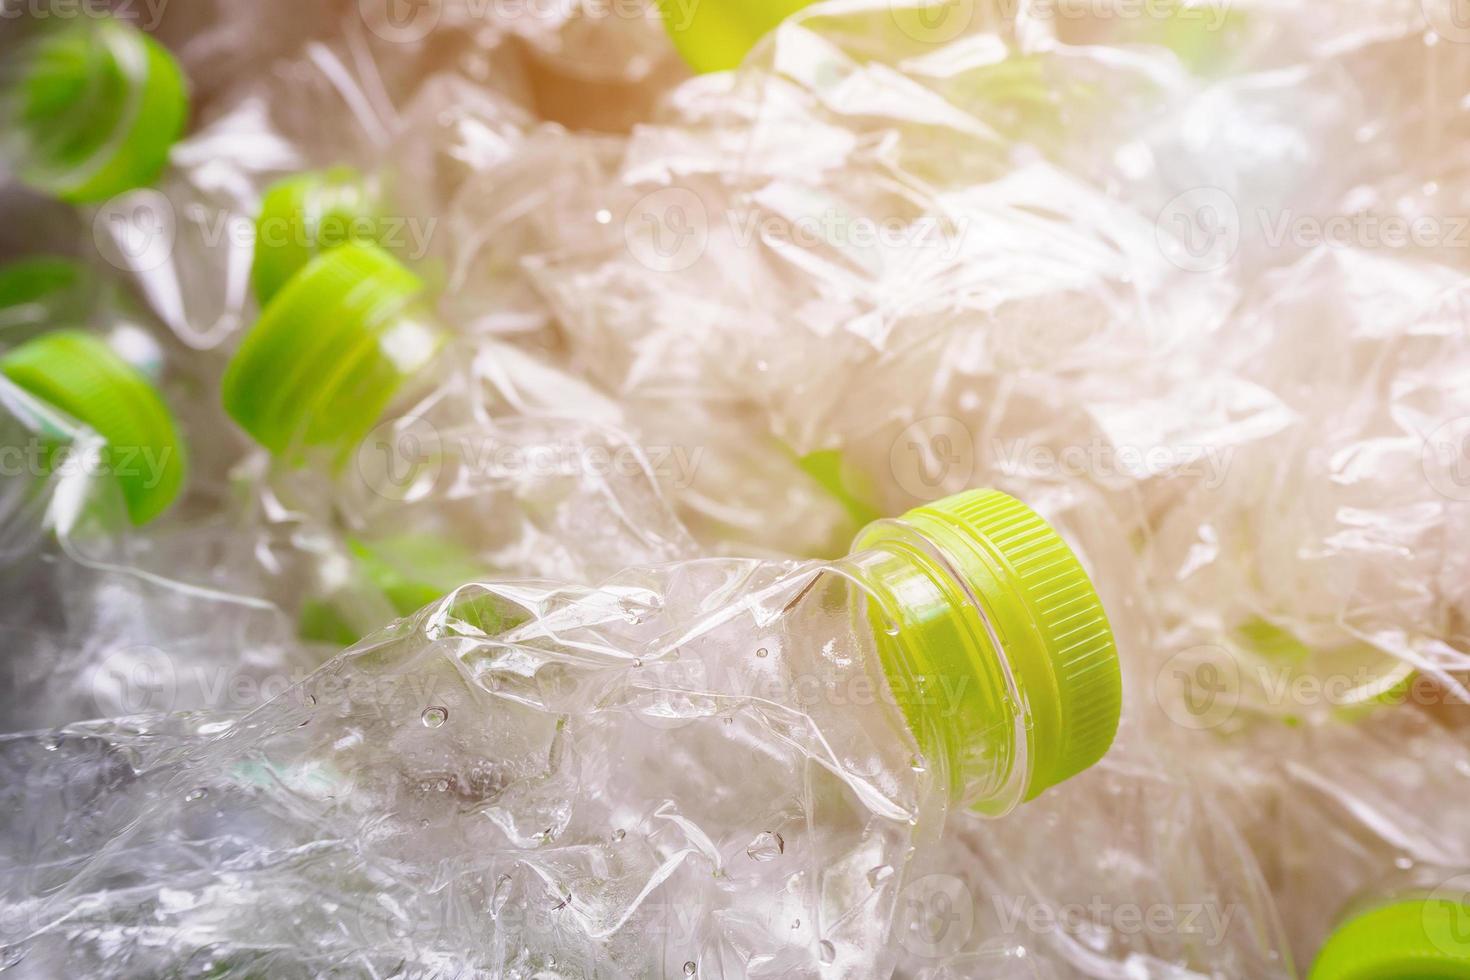 plastic bottles recycle background concept photo